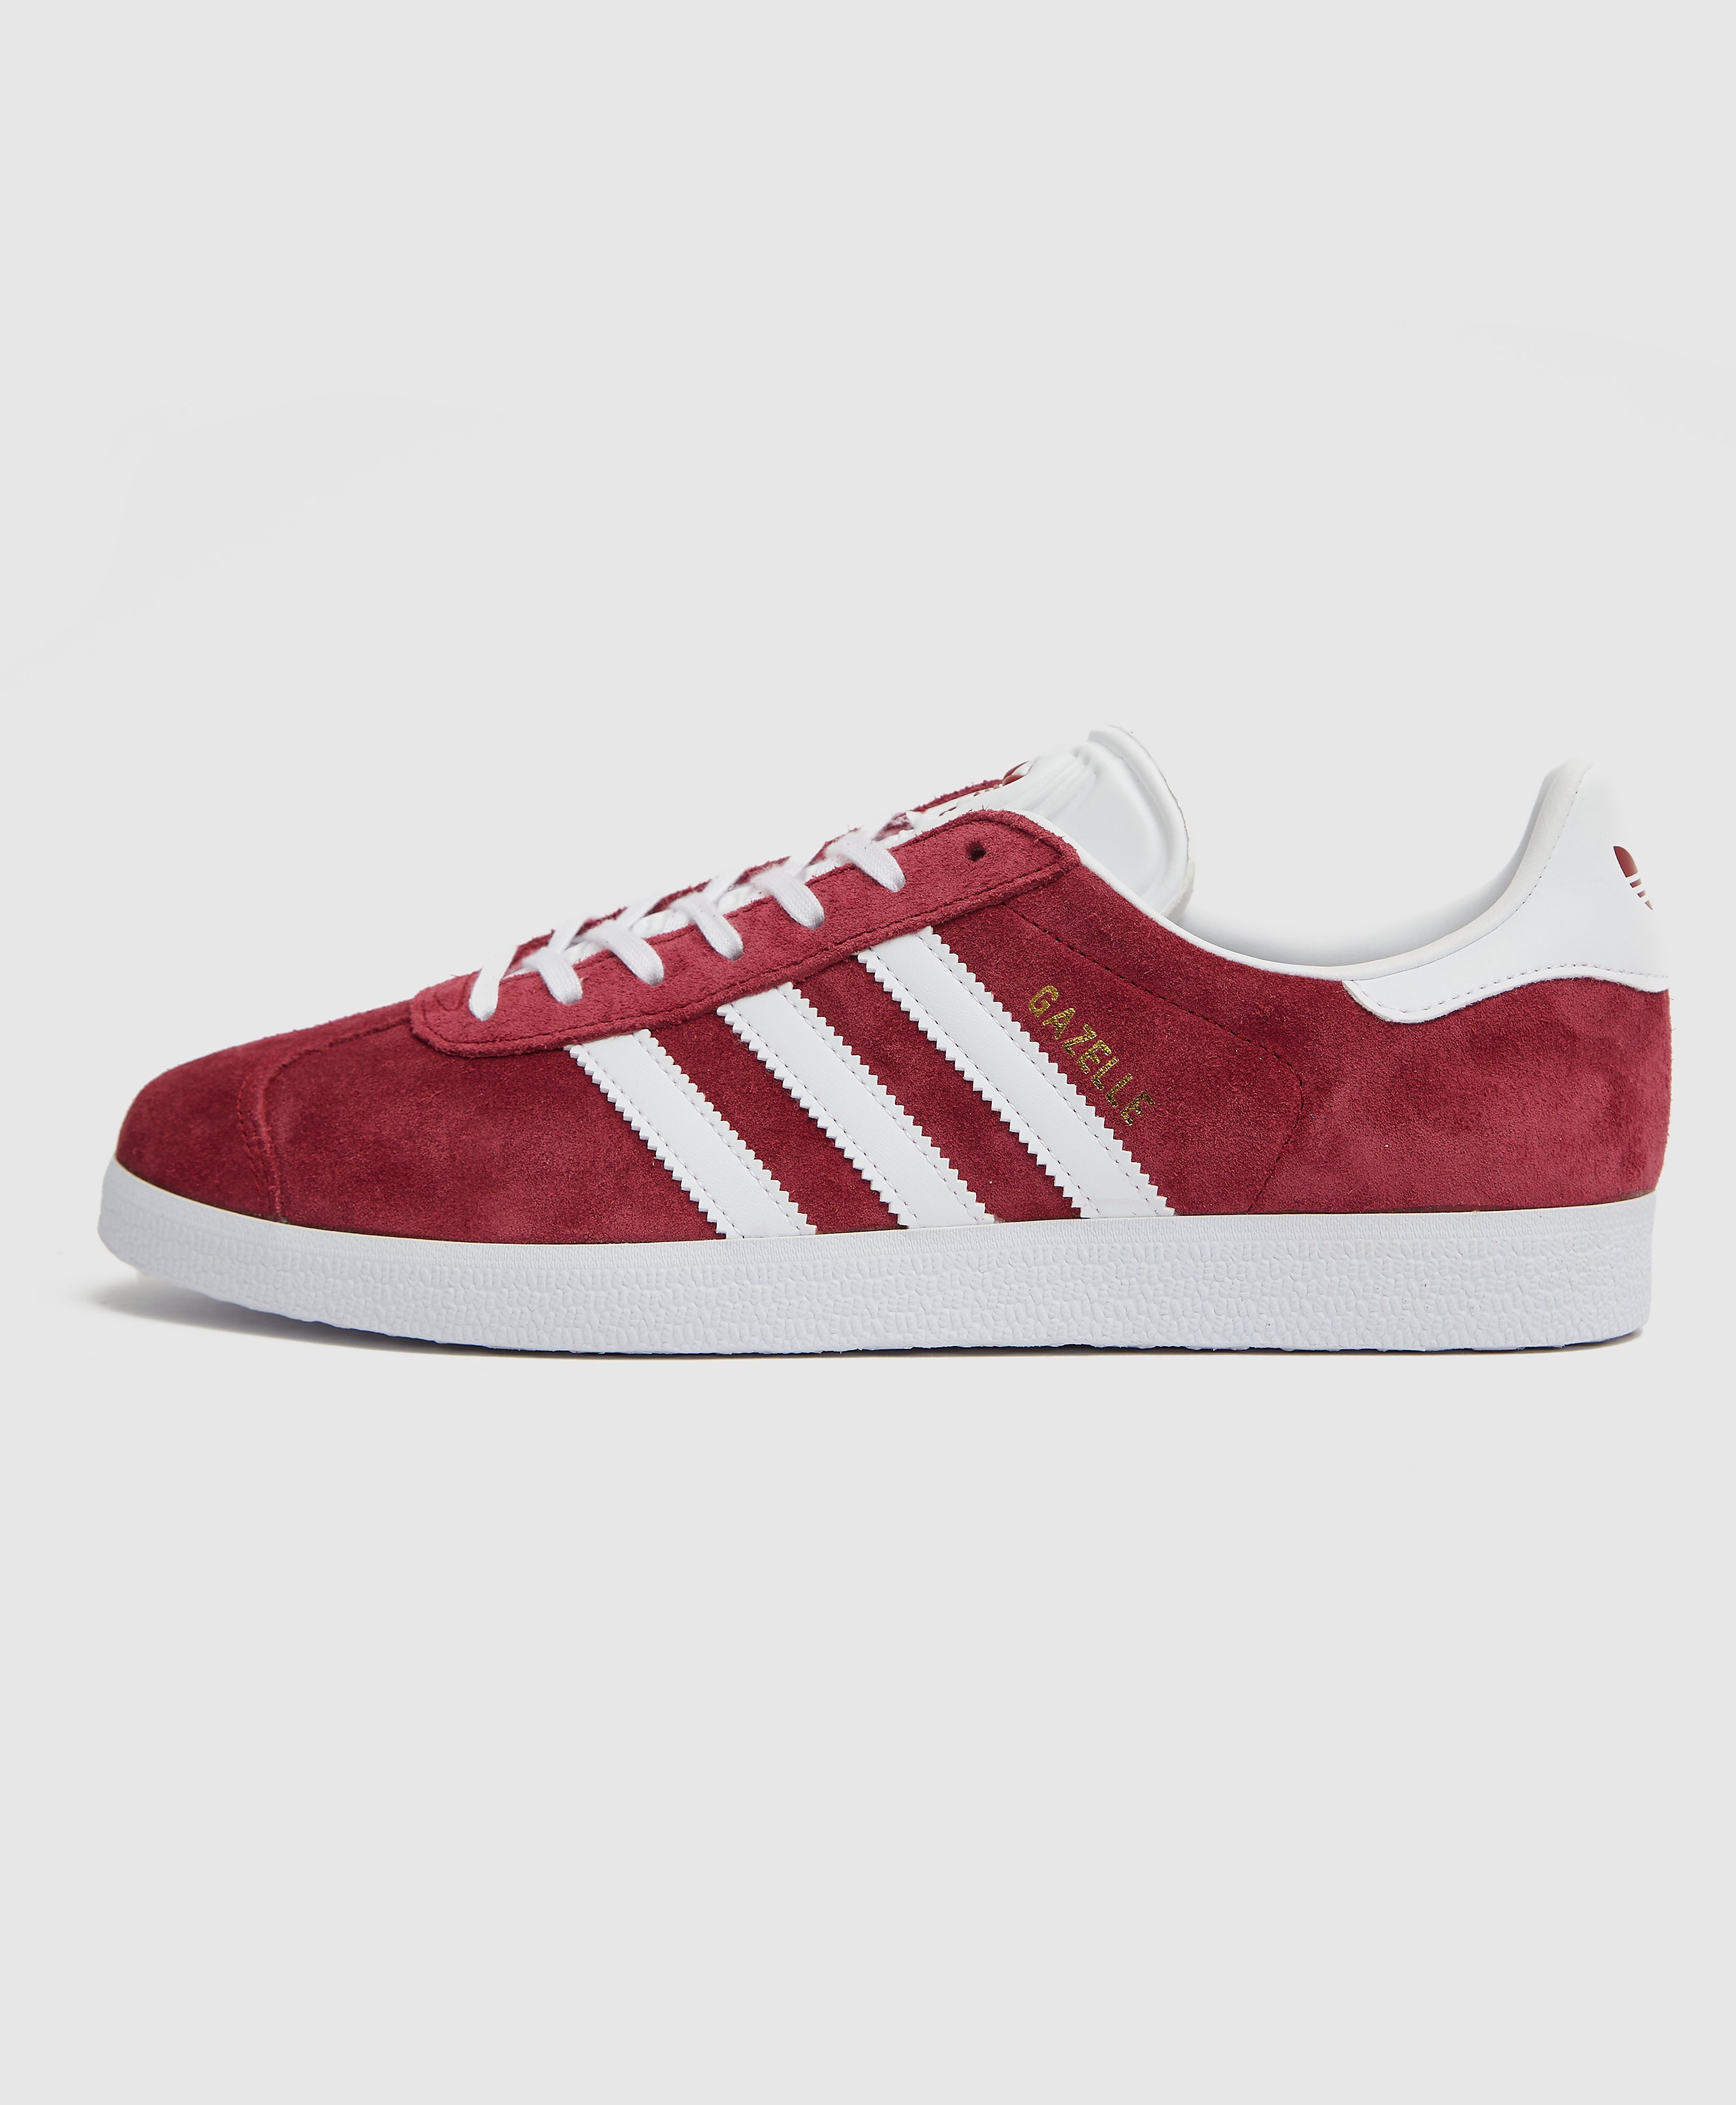 Men's adidas Originals Gazelle Trainers - Red/White, Red/White product